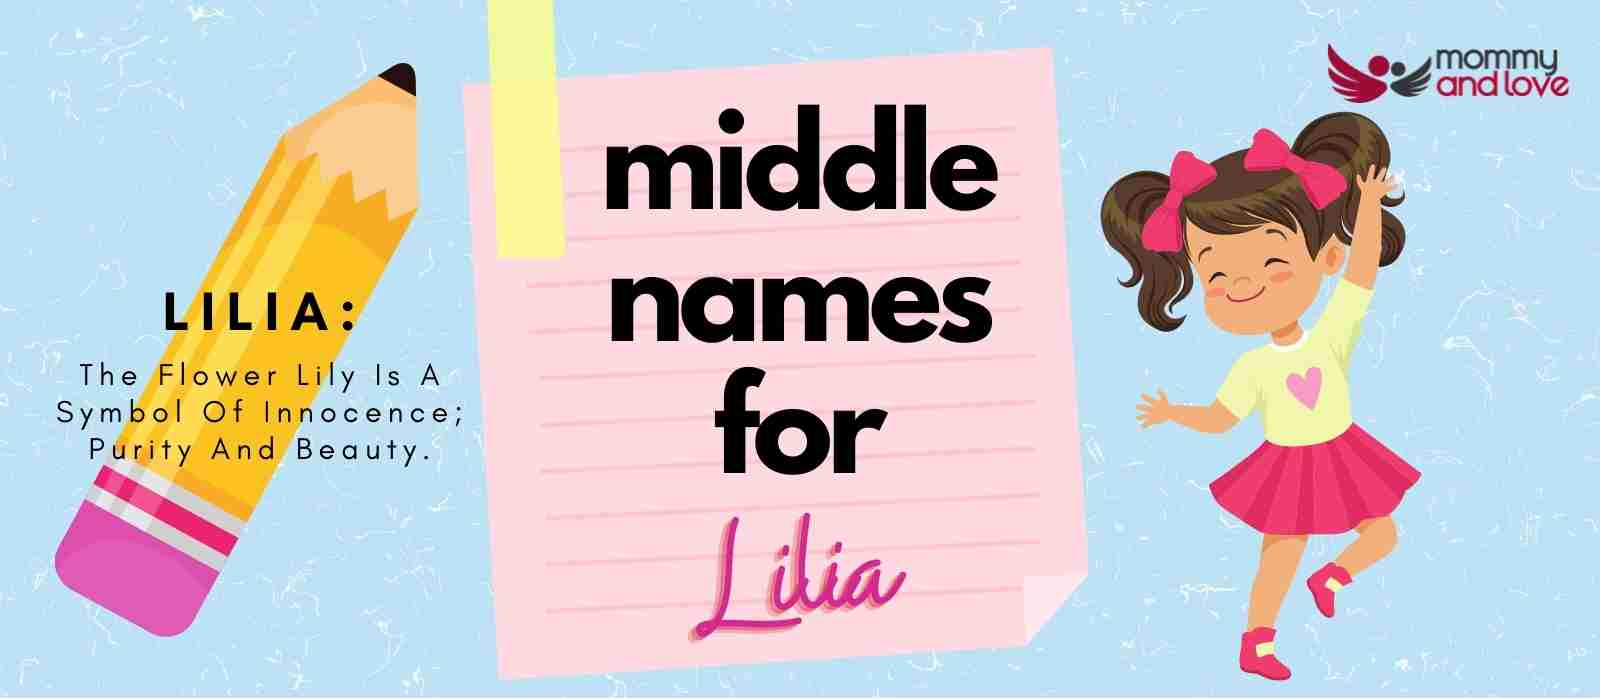 Middle Names for Lilia